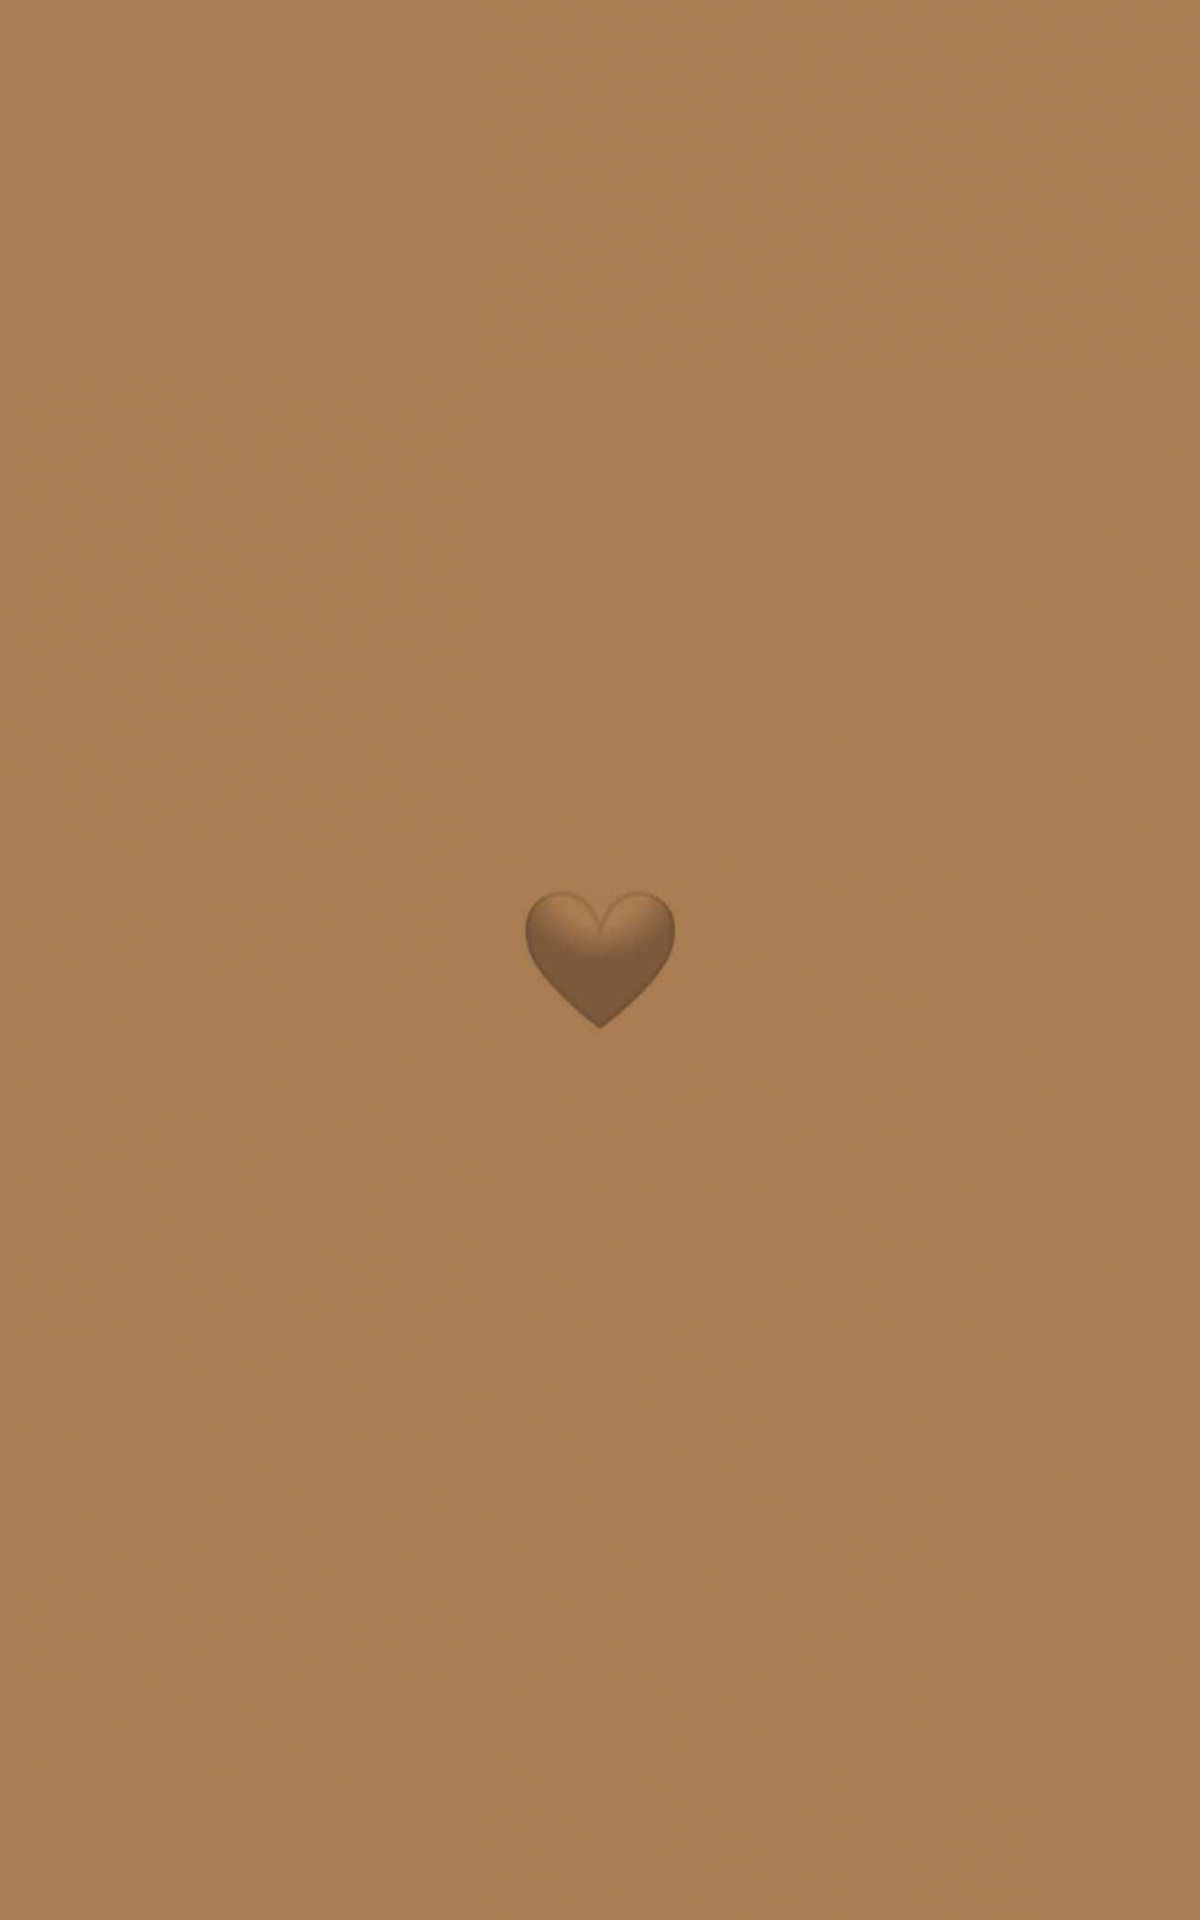 25 Brown Aesthetic Wallpaper for Laptop  Heart Cut Out Brown Background 1   Fab Mood  Wedding Colours Wedding Themes Wedding colour palettes